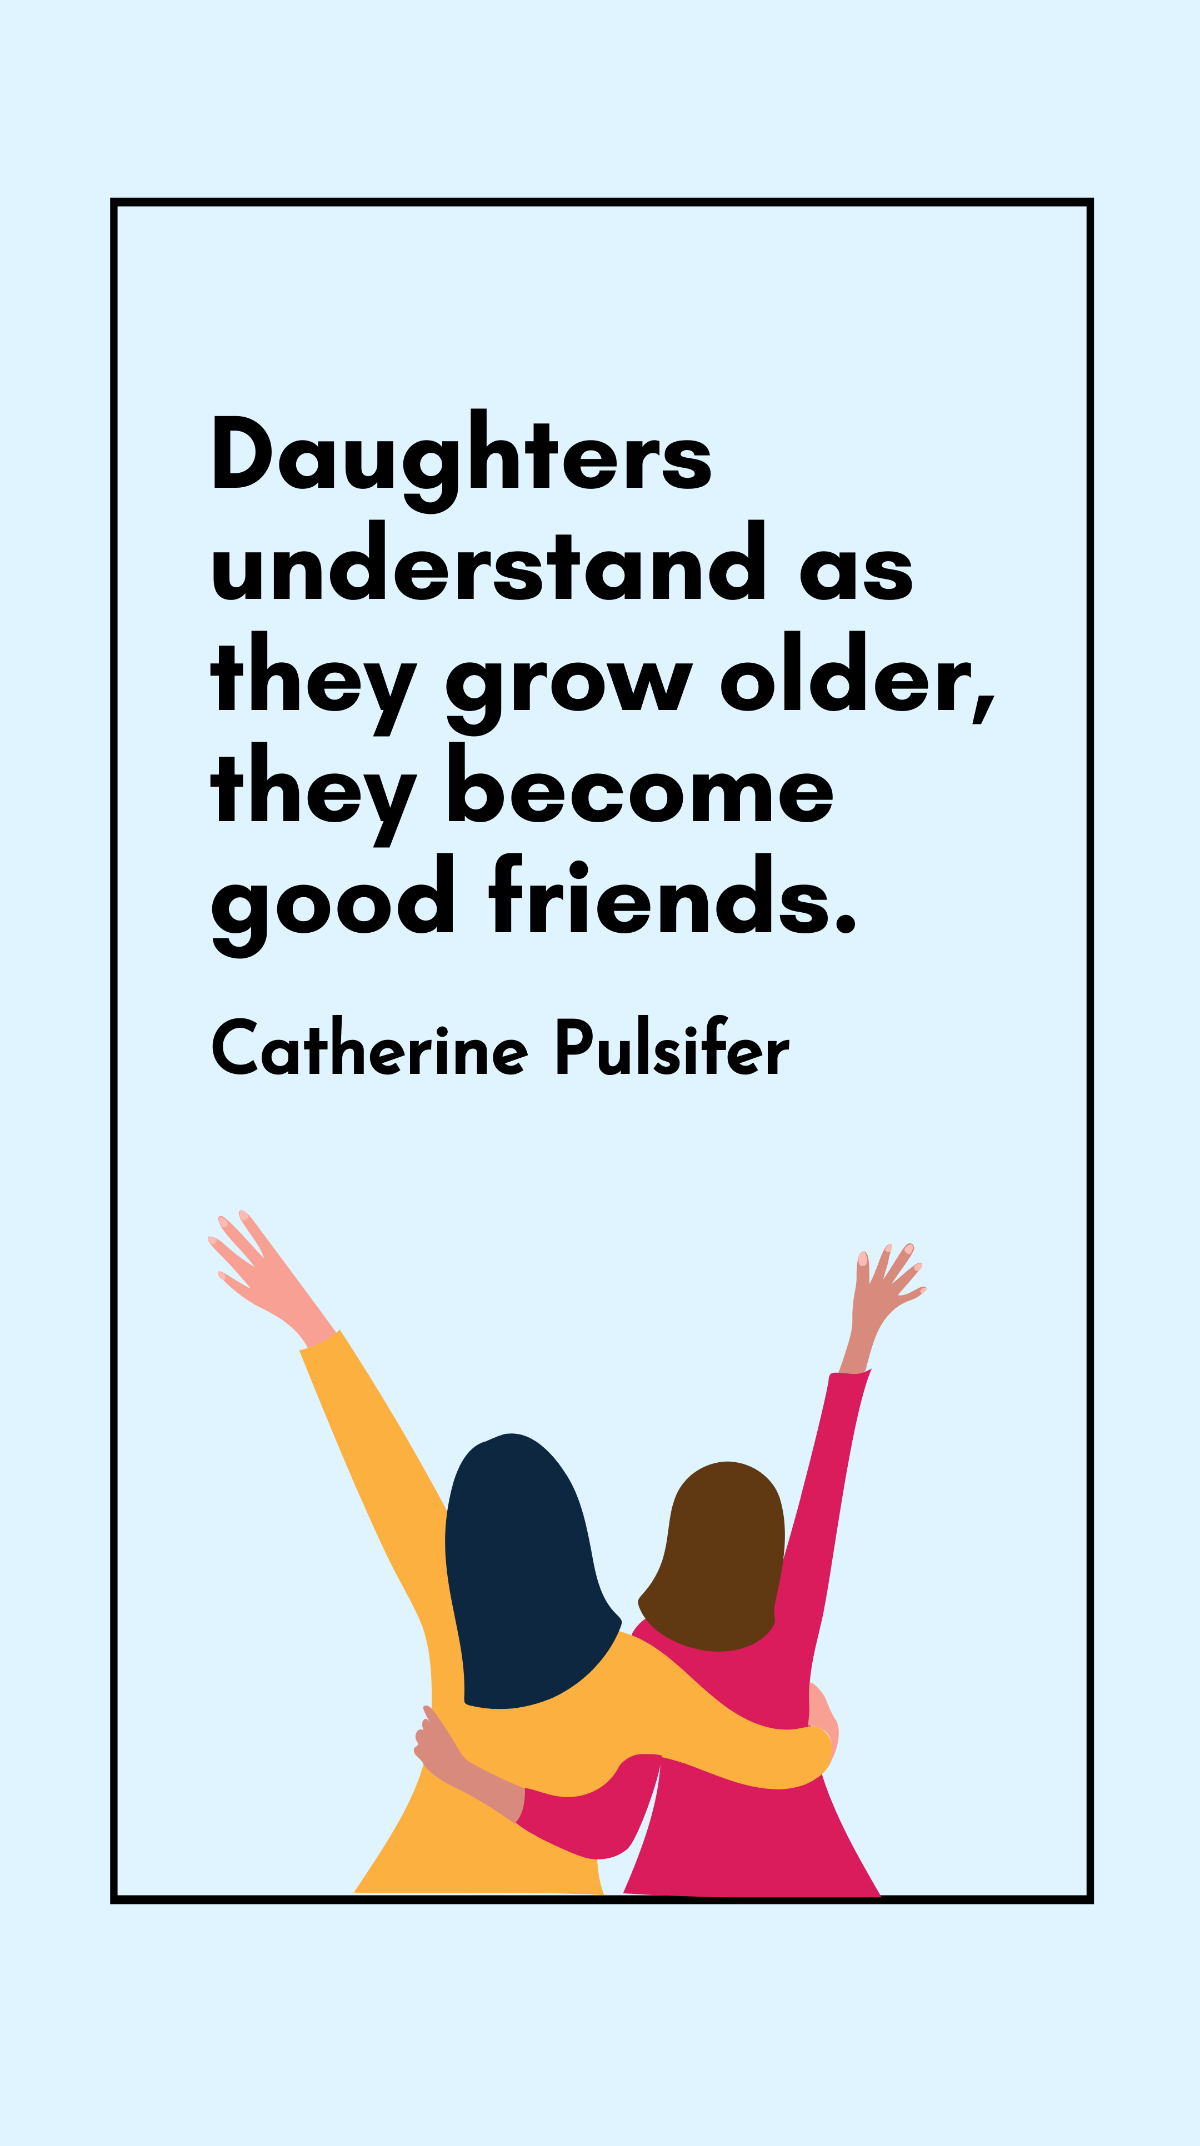 Catherine Pulsifer - Daughters understand as they grow older, they become good friends. Template